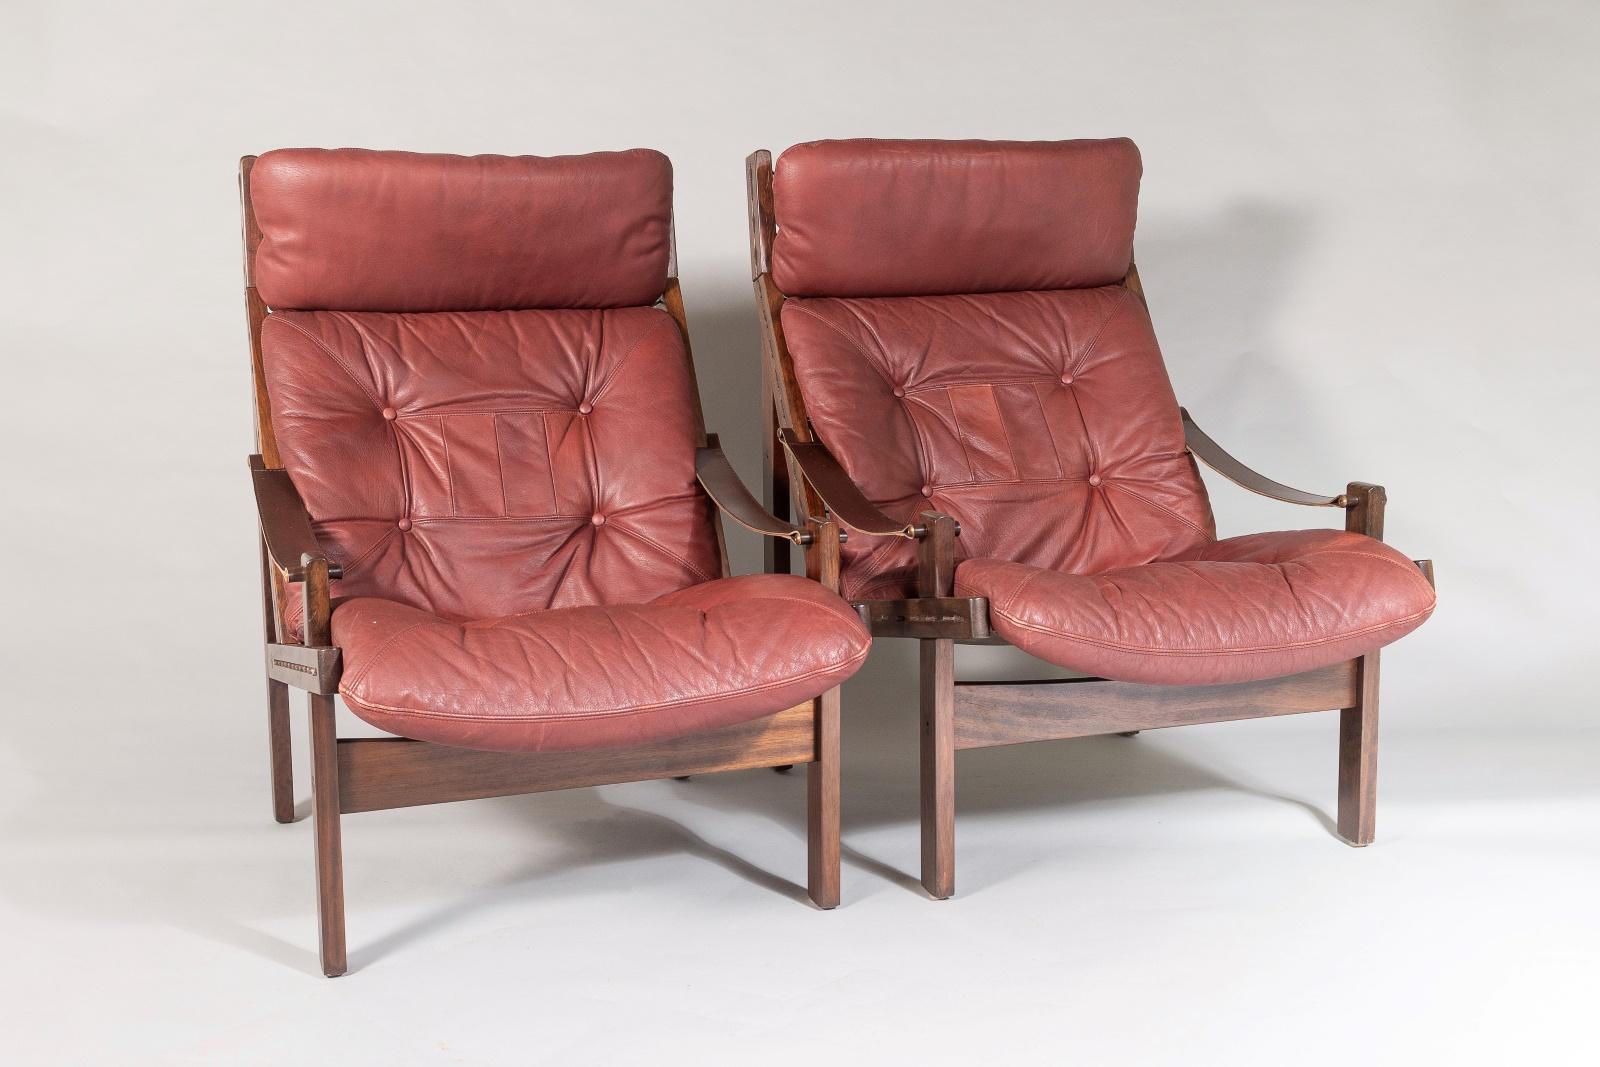 A pair of Hunter Safari lounge chairs designed in the 1960s by Norwegian Torbjørn Afdal for Bruksbo.  Theses designer piece have stood the test of time, very desirable, both stylish and practical offering a great look and feel to a room.  This pair